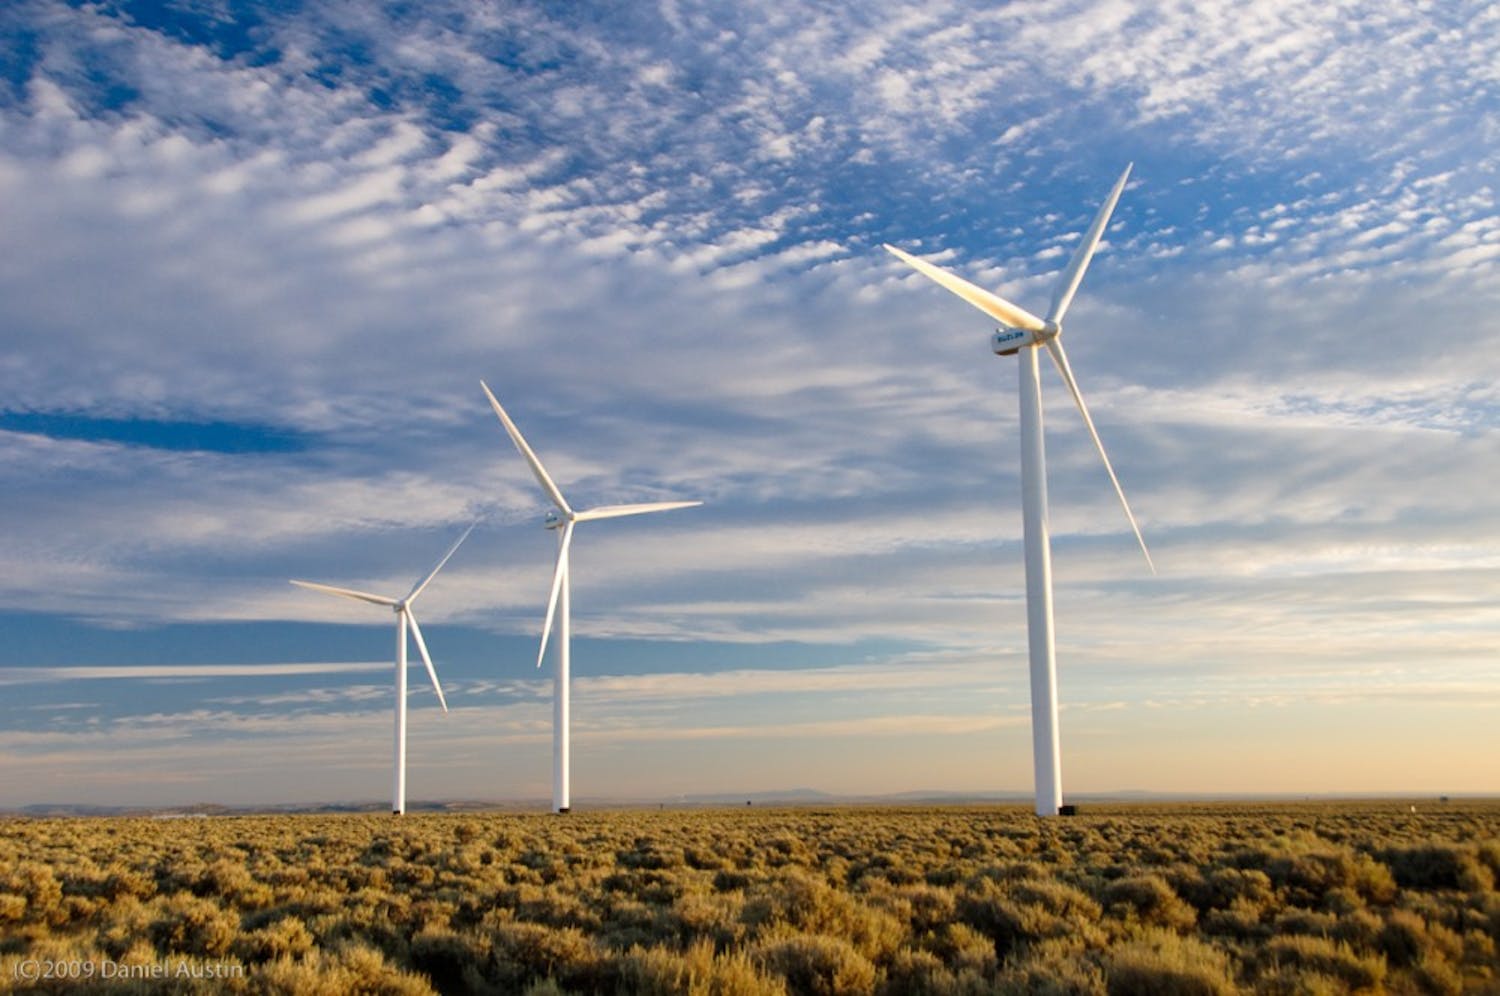 	Photo: A &#8220;wind farm&#8221; in Wyoming. Wind power is one the various forms of renewable energy cropping up around the country.